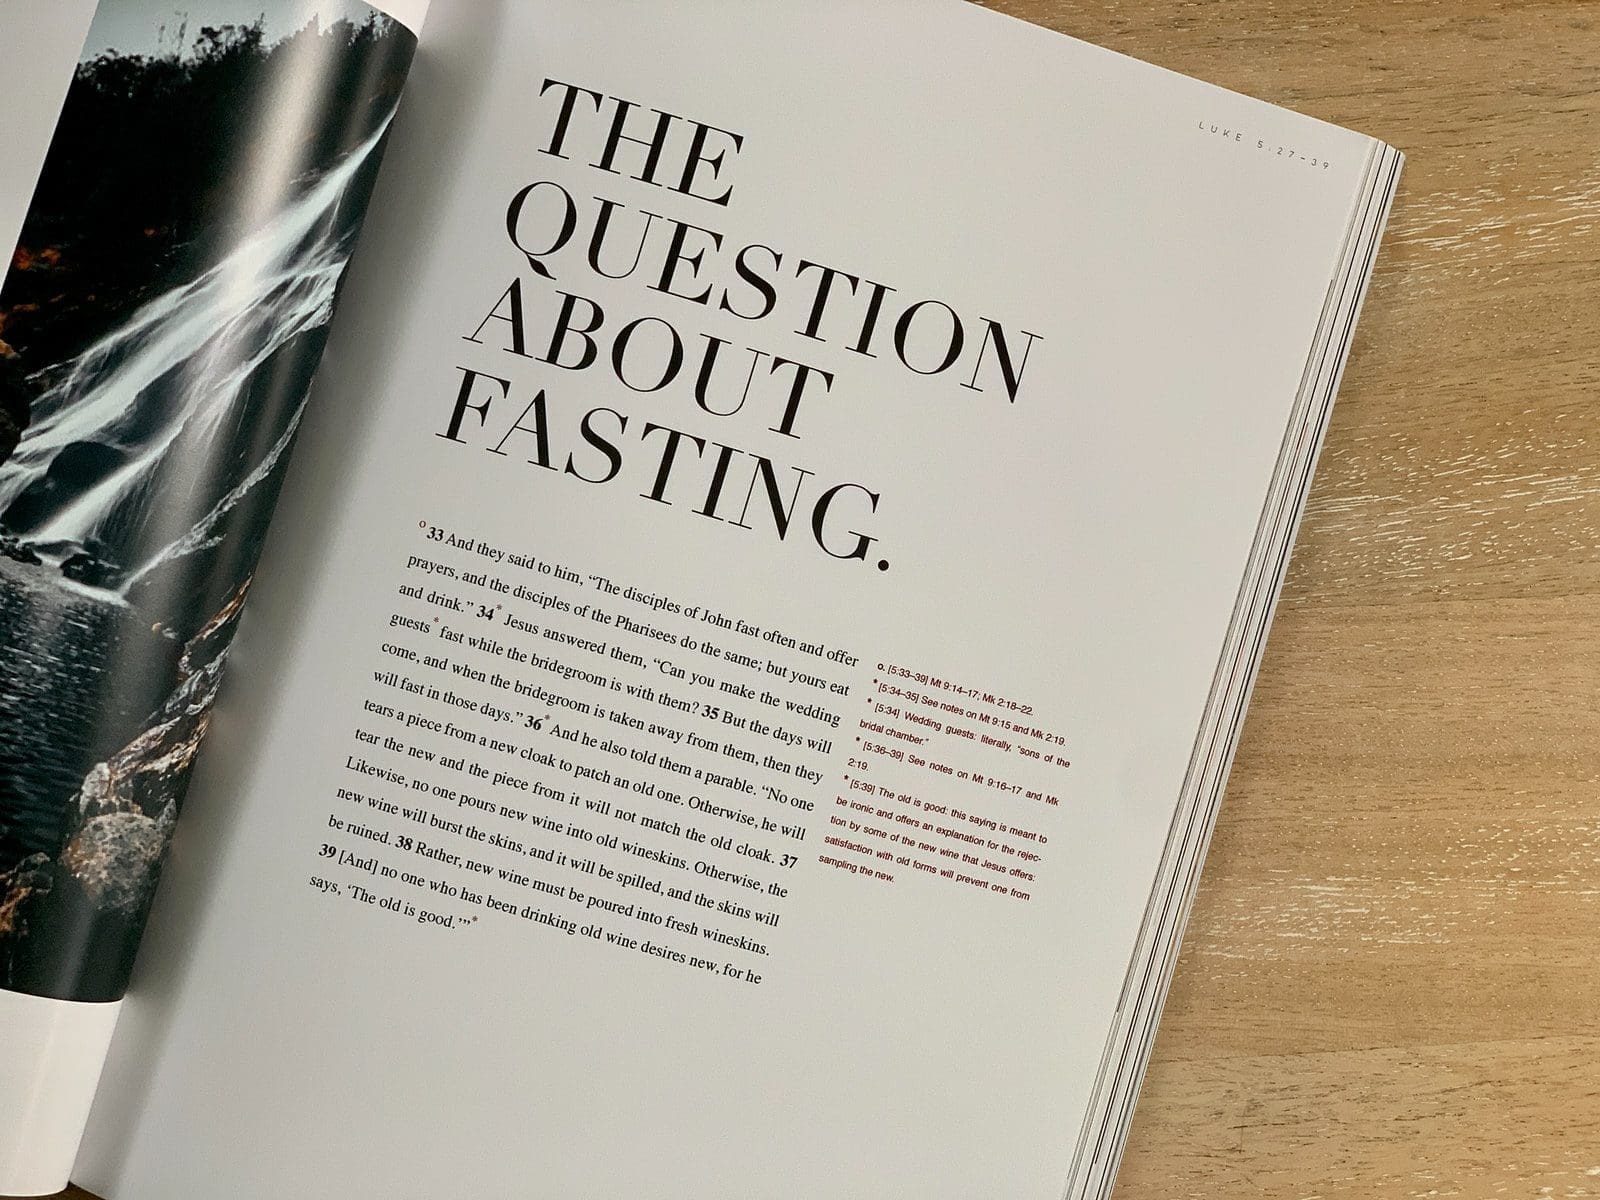 The question about fasting